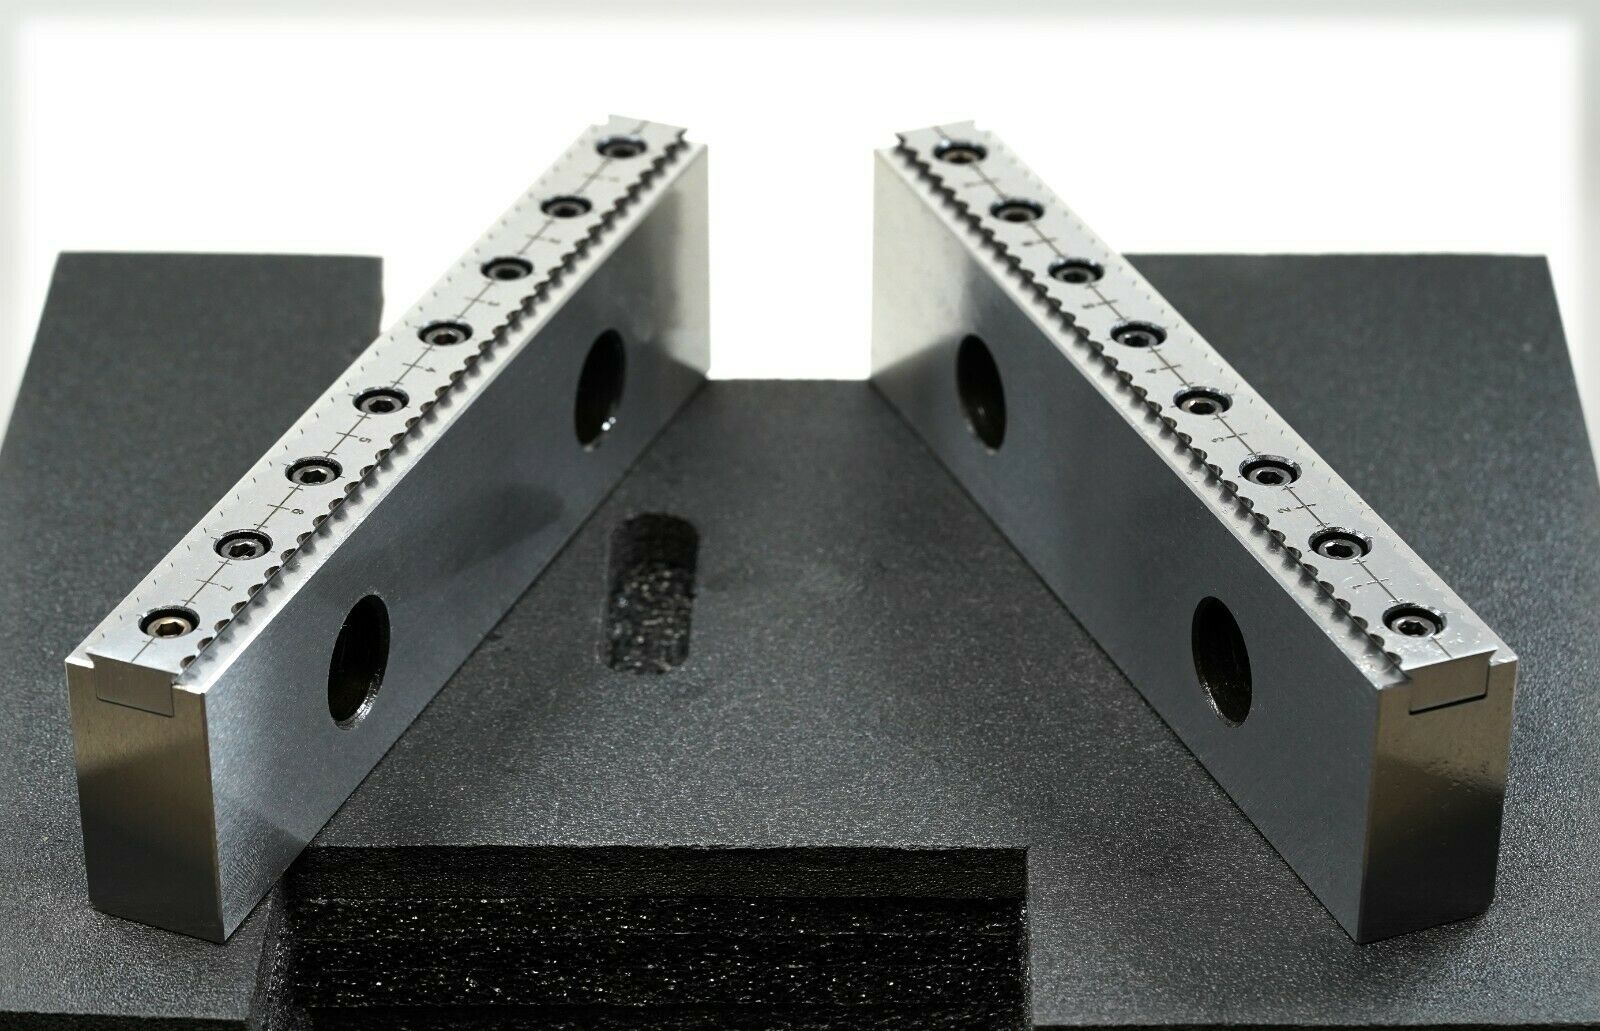 Professional Cnc Milling Steel Vise Hard Jaw, 8” Wide, Serrated With 0.100” Repl